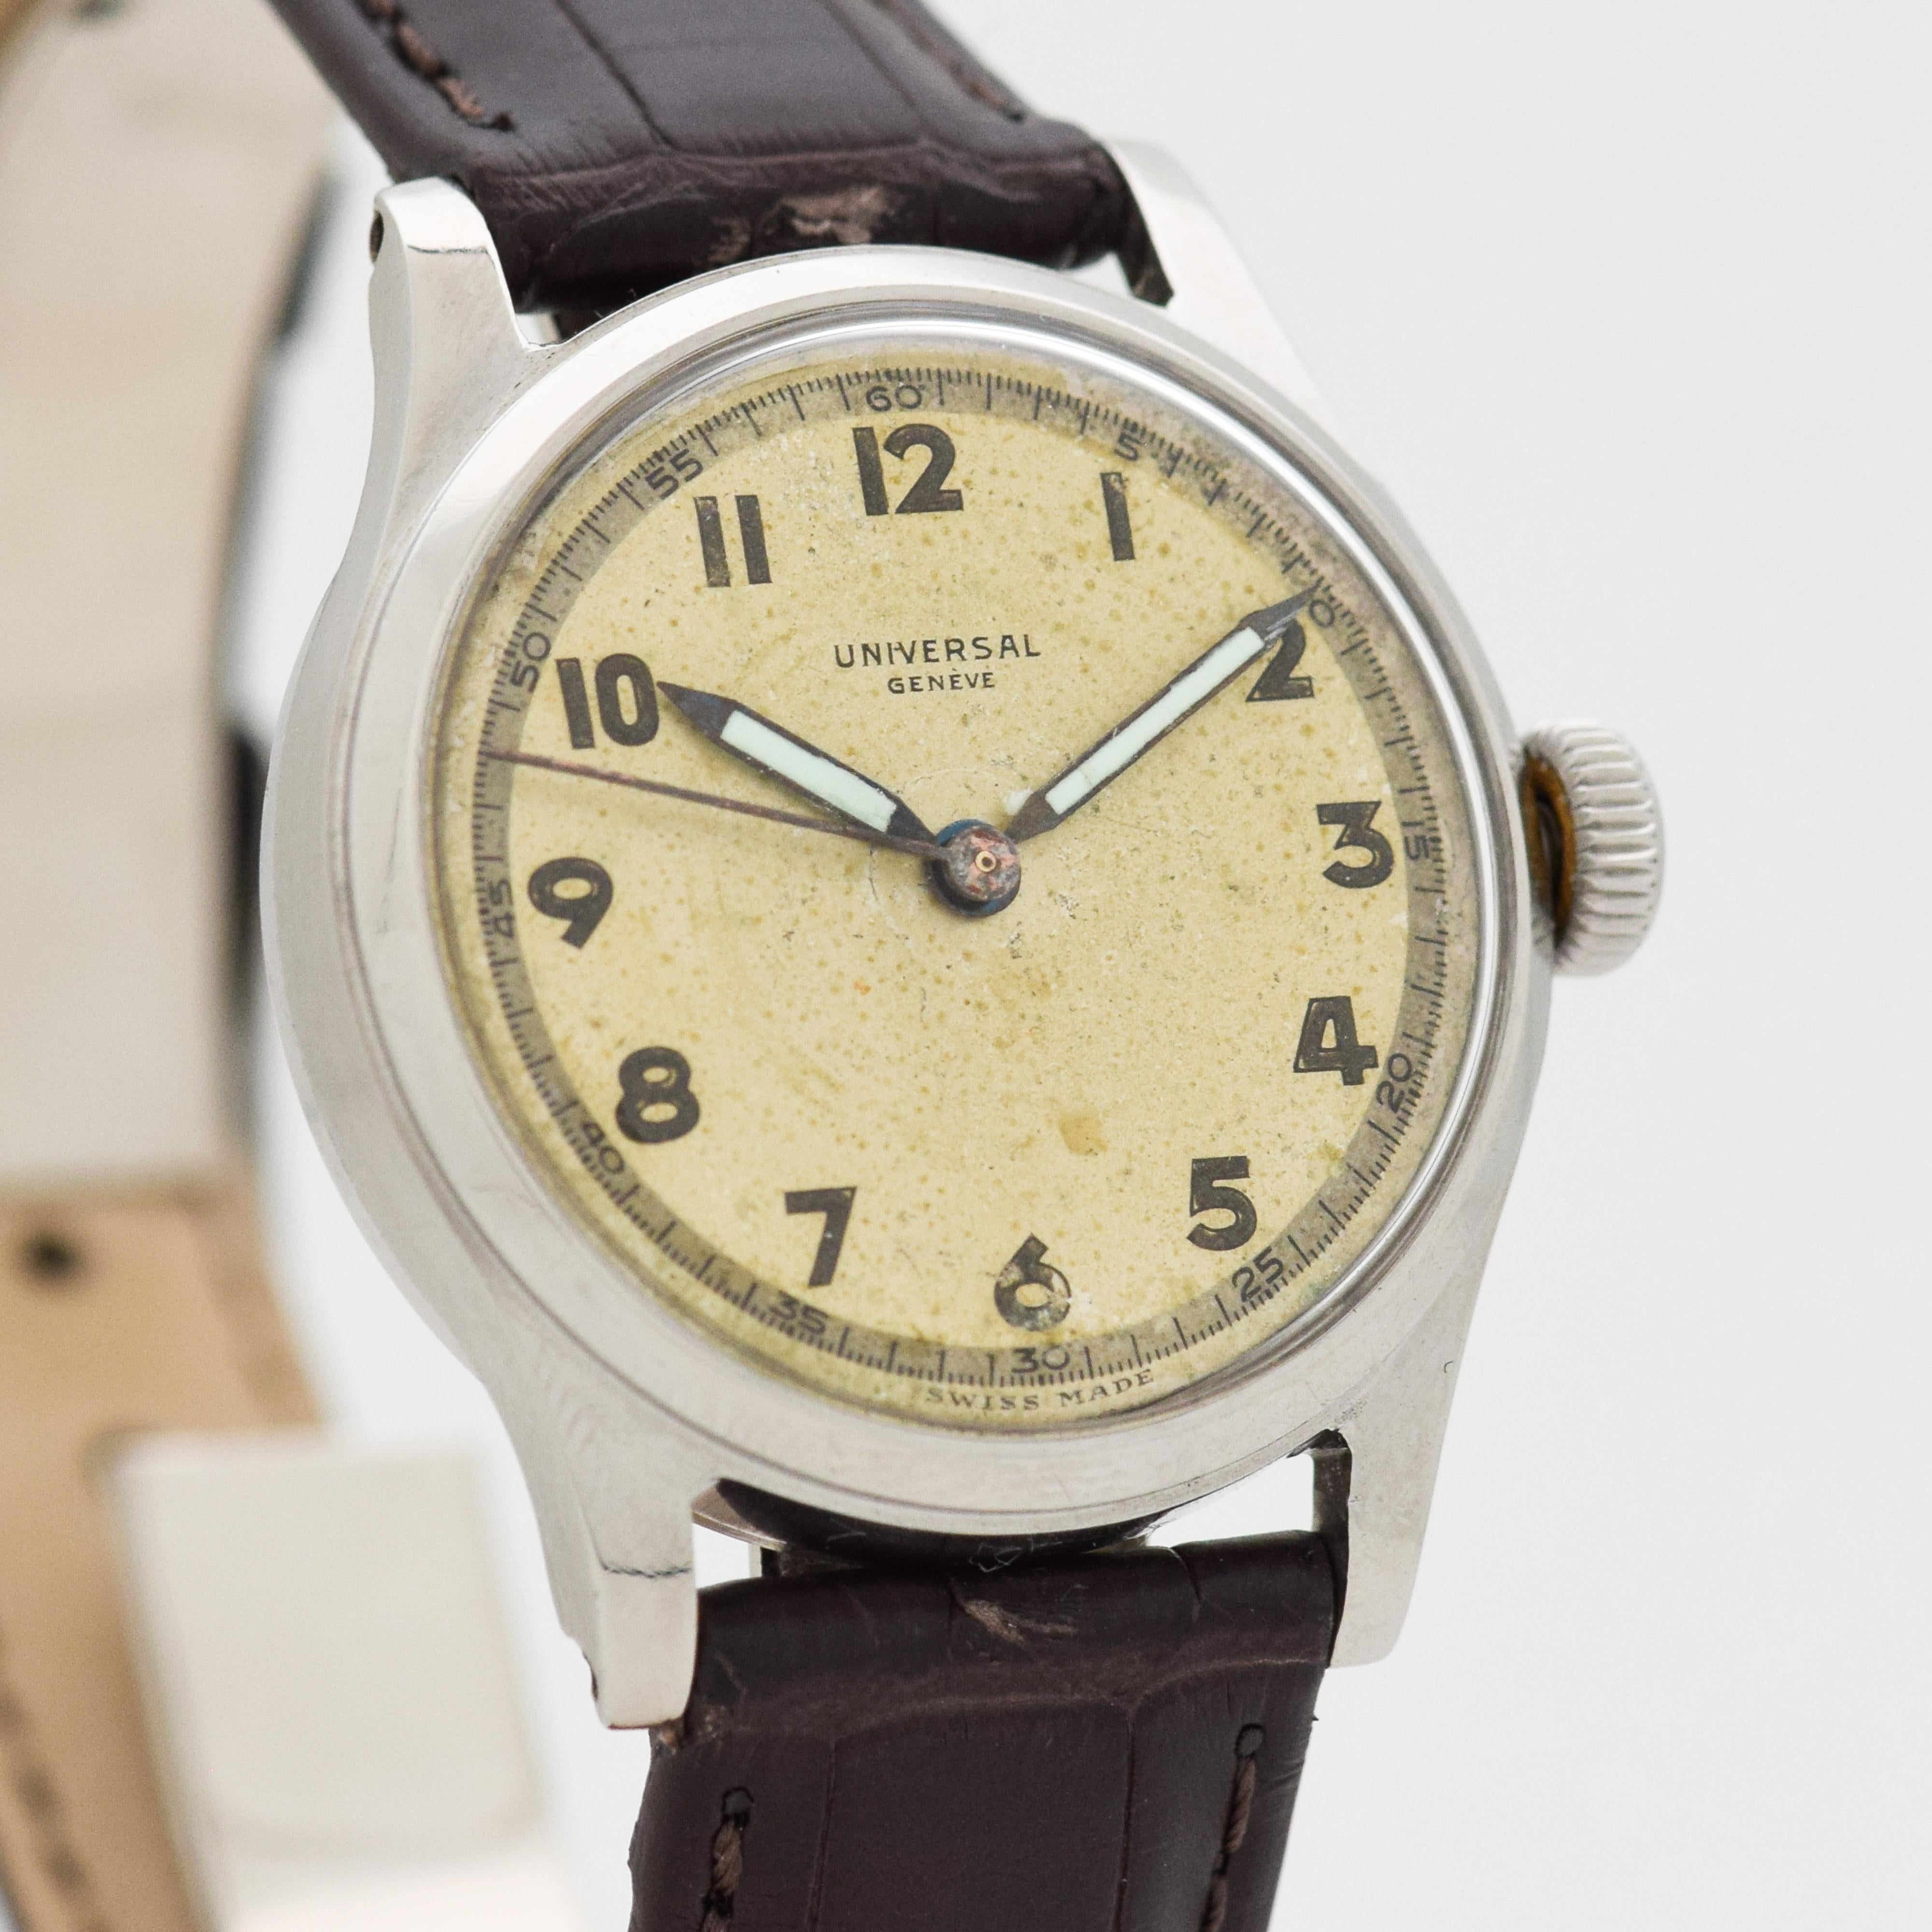 1942 Vintage Universal Geneve WWII Era and Style Enversteel watch with Original Silver Dial with Luminous Arabic Numbers. 31mm x 36mm lug to lug (1.22 in. x 1.42 in.) - 17 jewel, manual caliber movement. Triple Signed. 